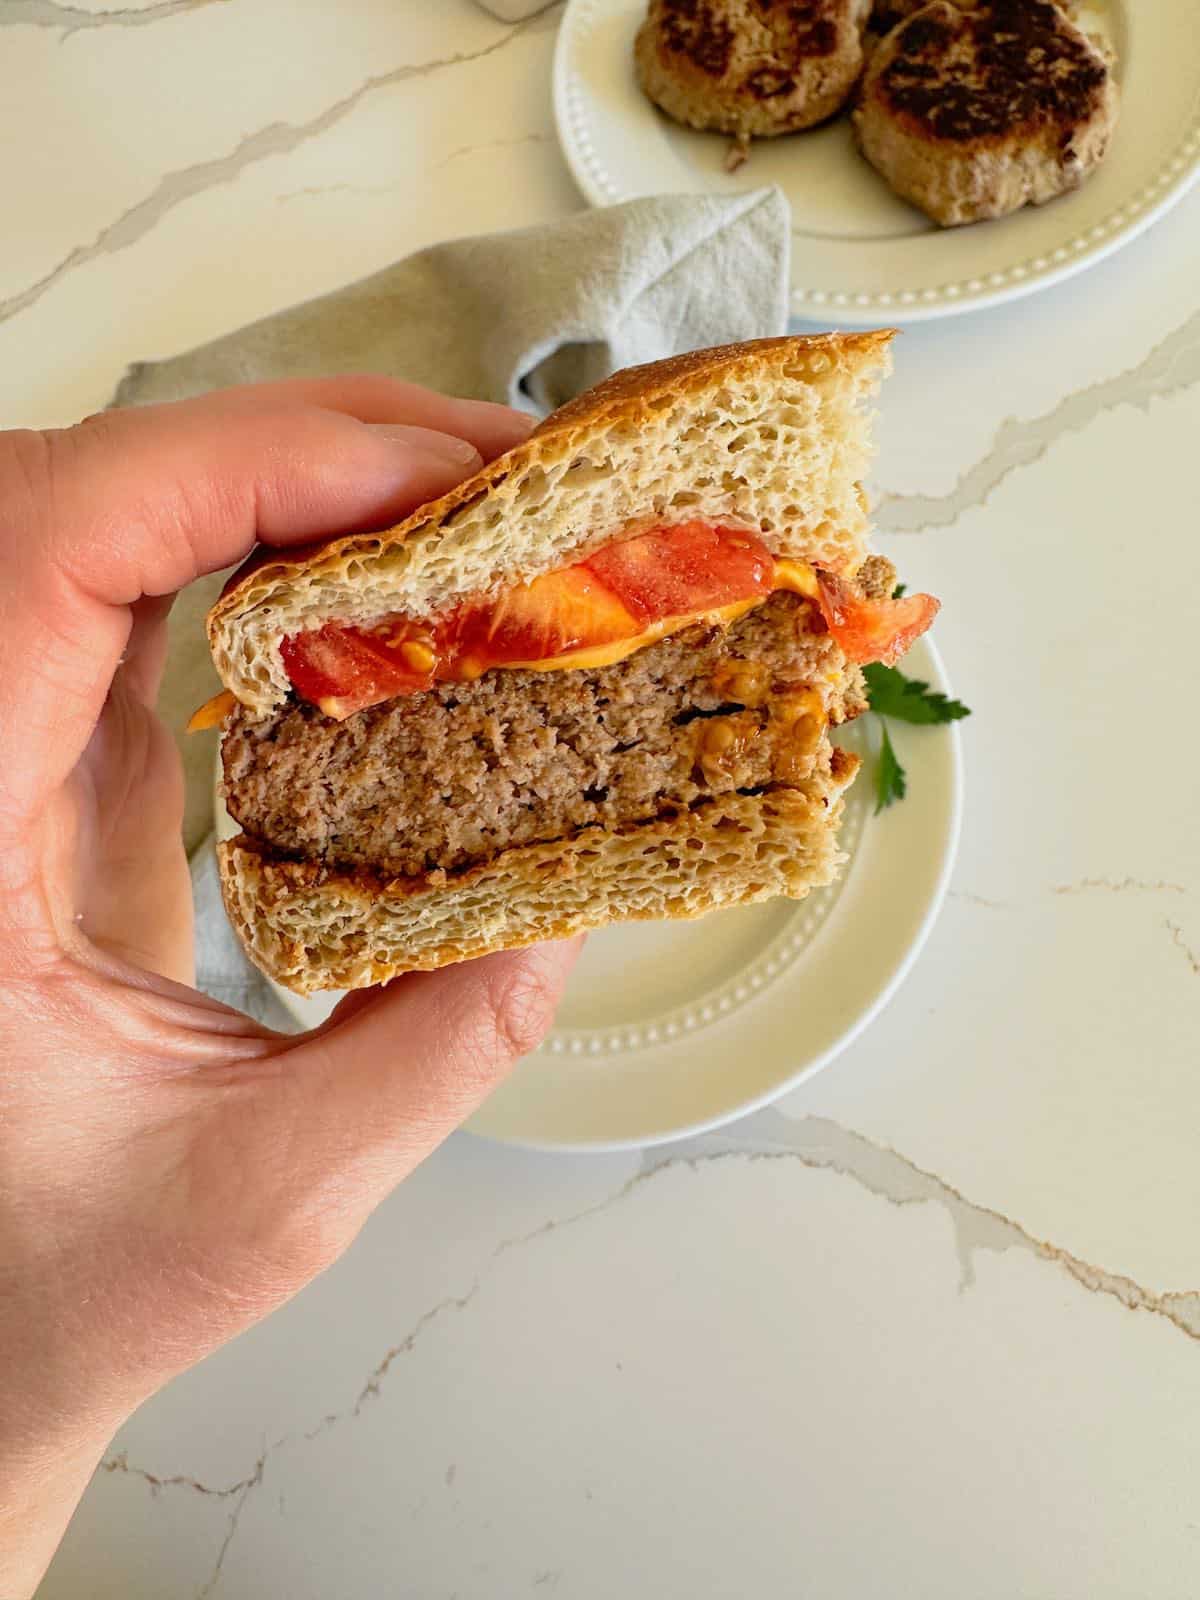 Handheld turkey burgers on a bun with tomato and a cheese slice.